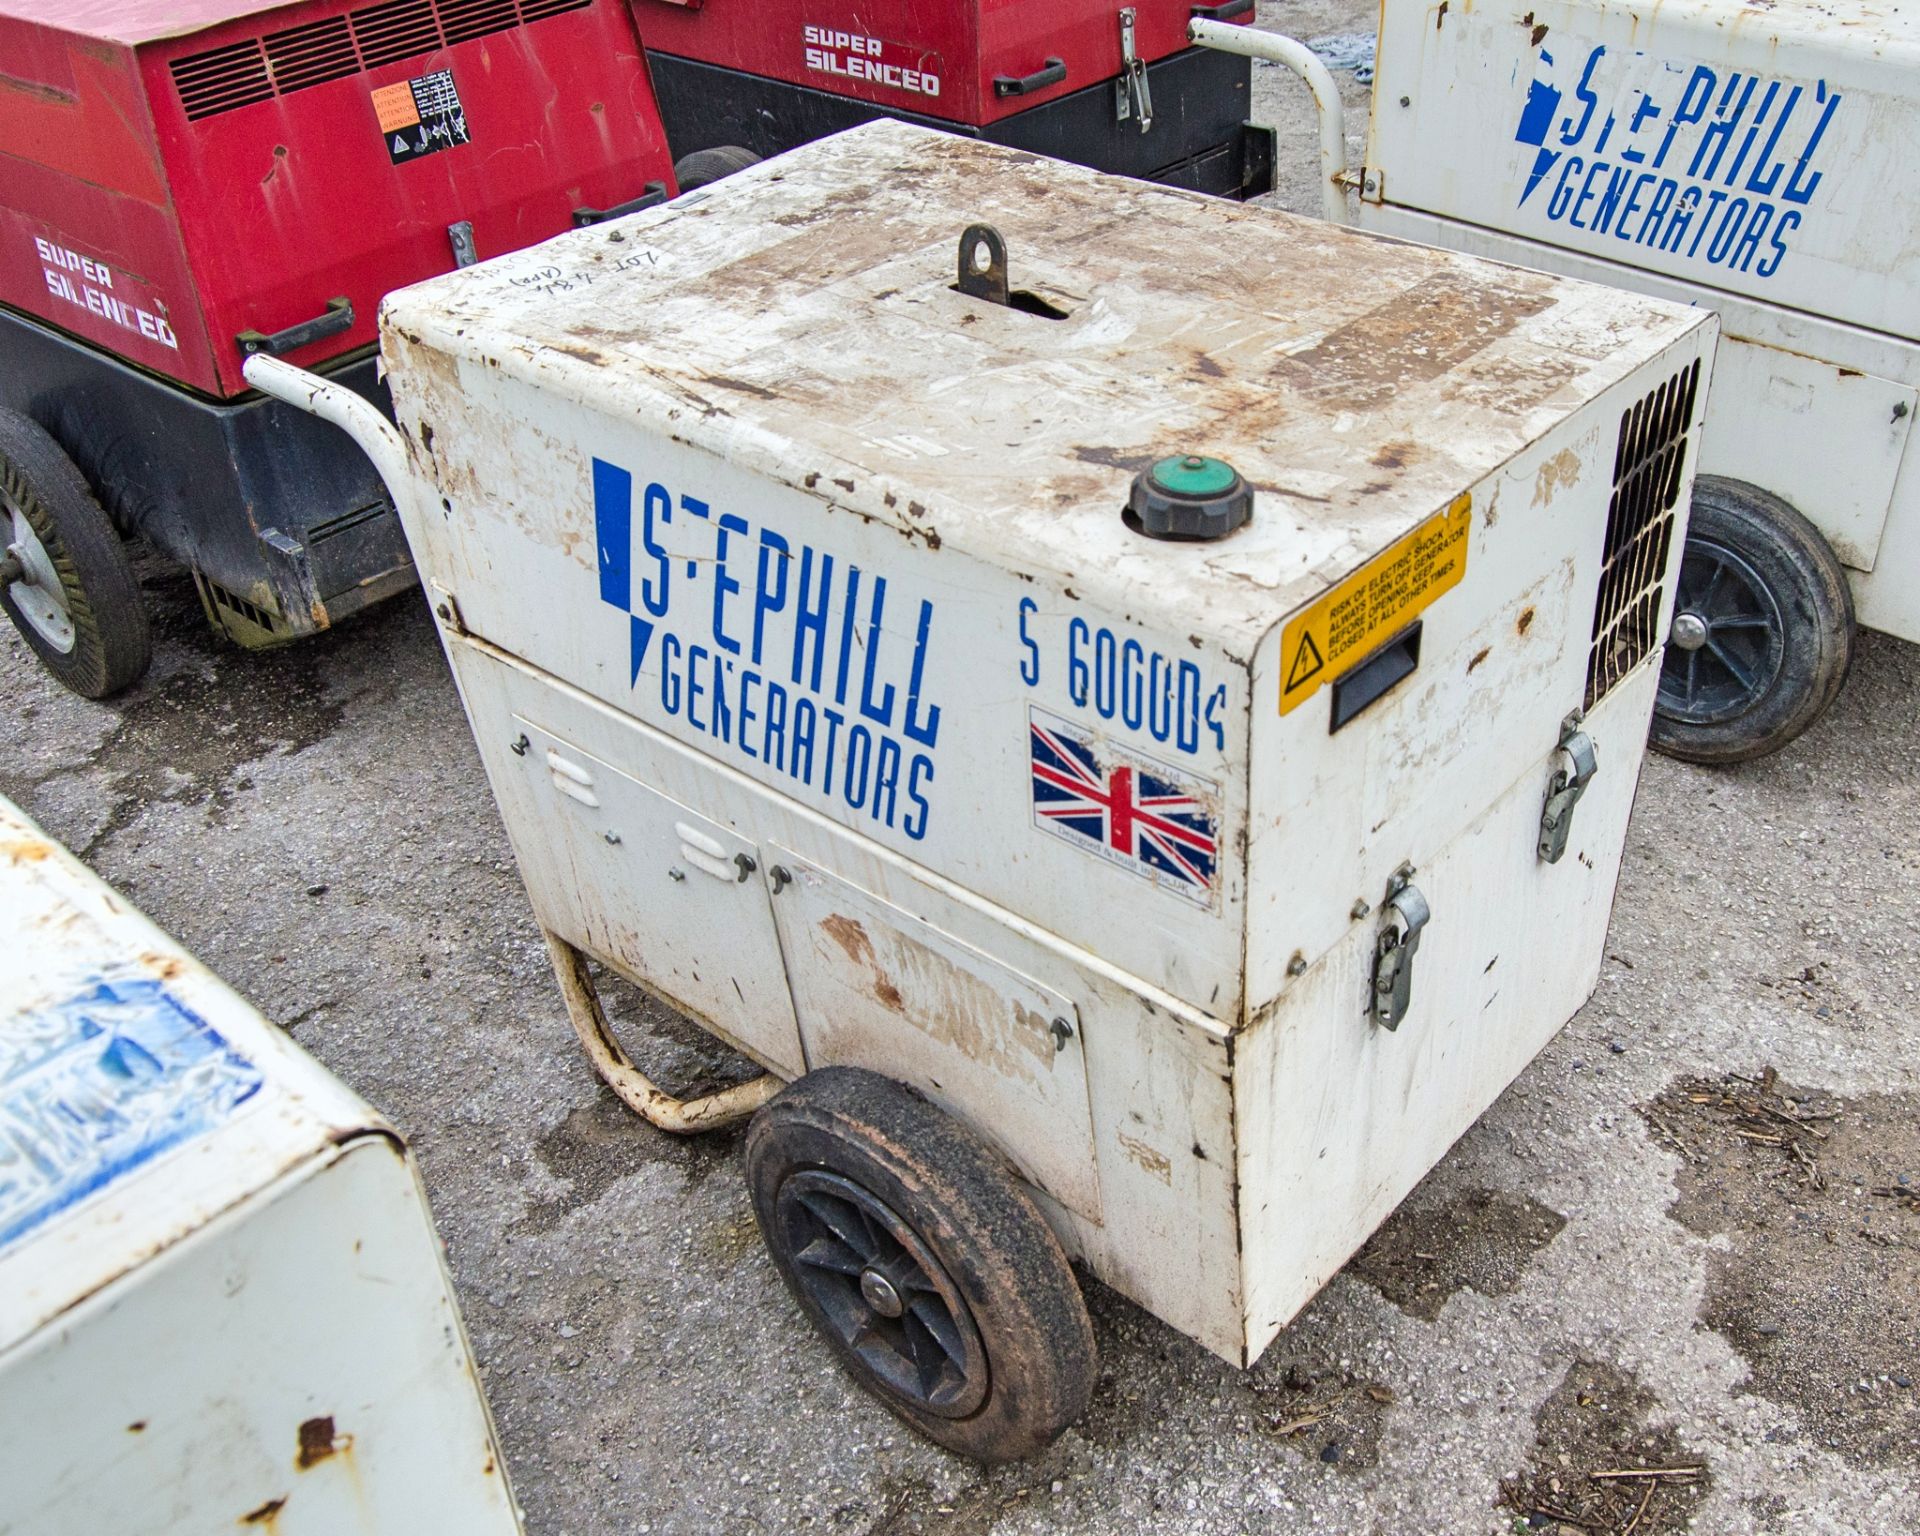 Stephill 6 kva diesel driven generator S/N: 278267 Recorded Hours: 3065 18030998 - Image 2 of 6